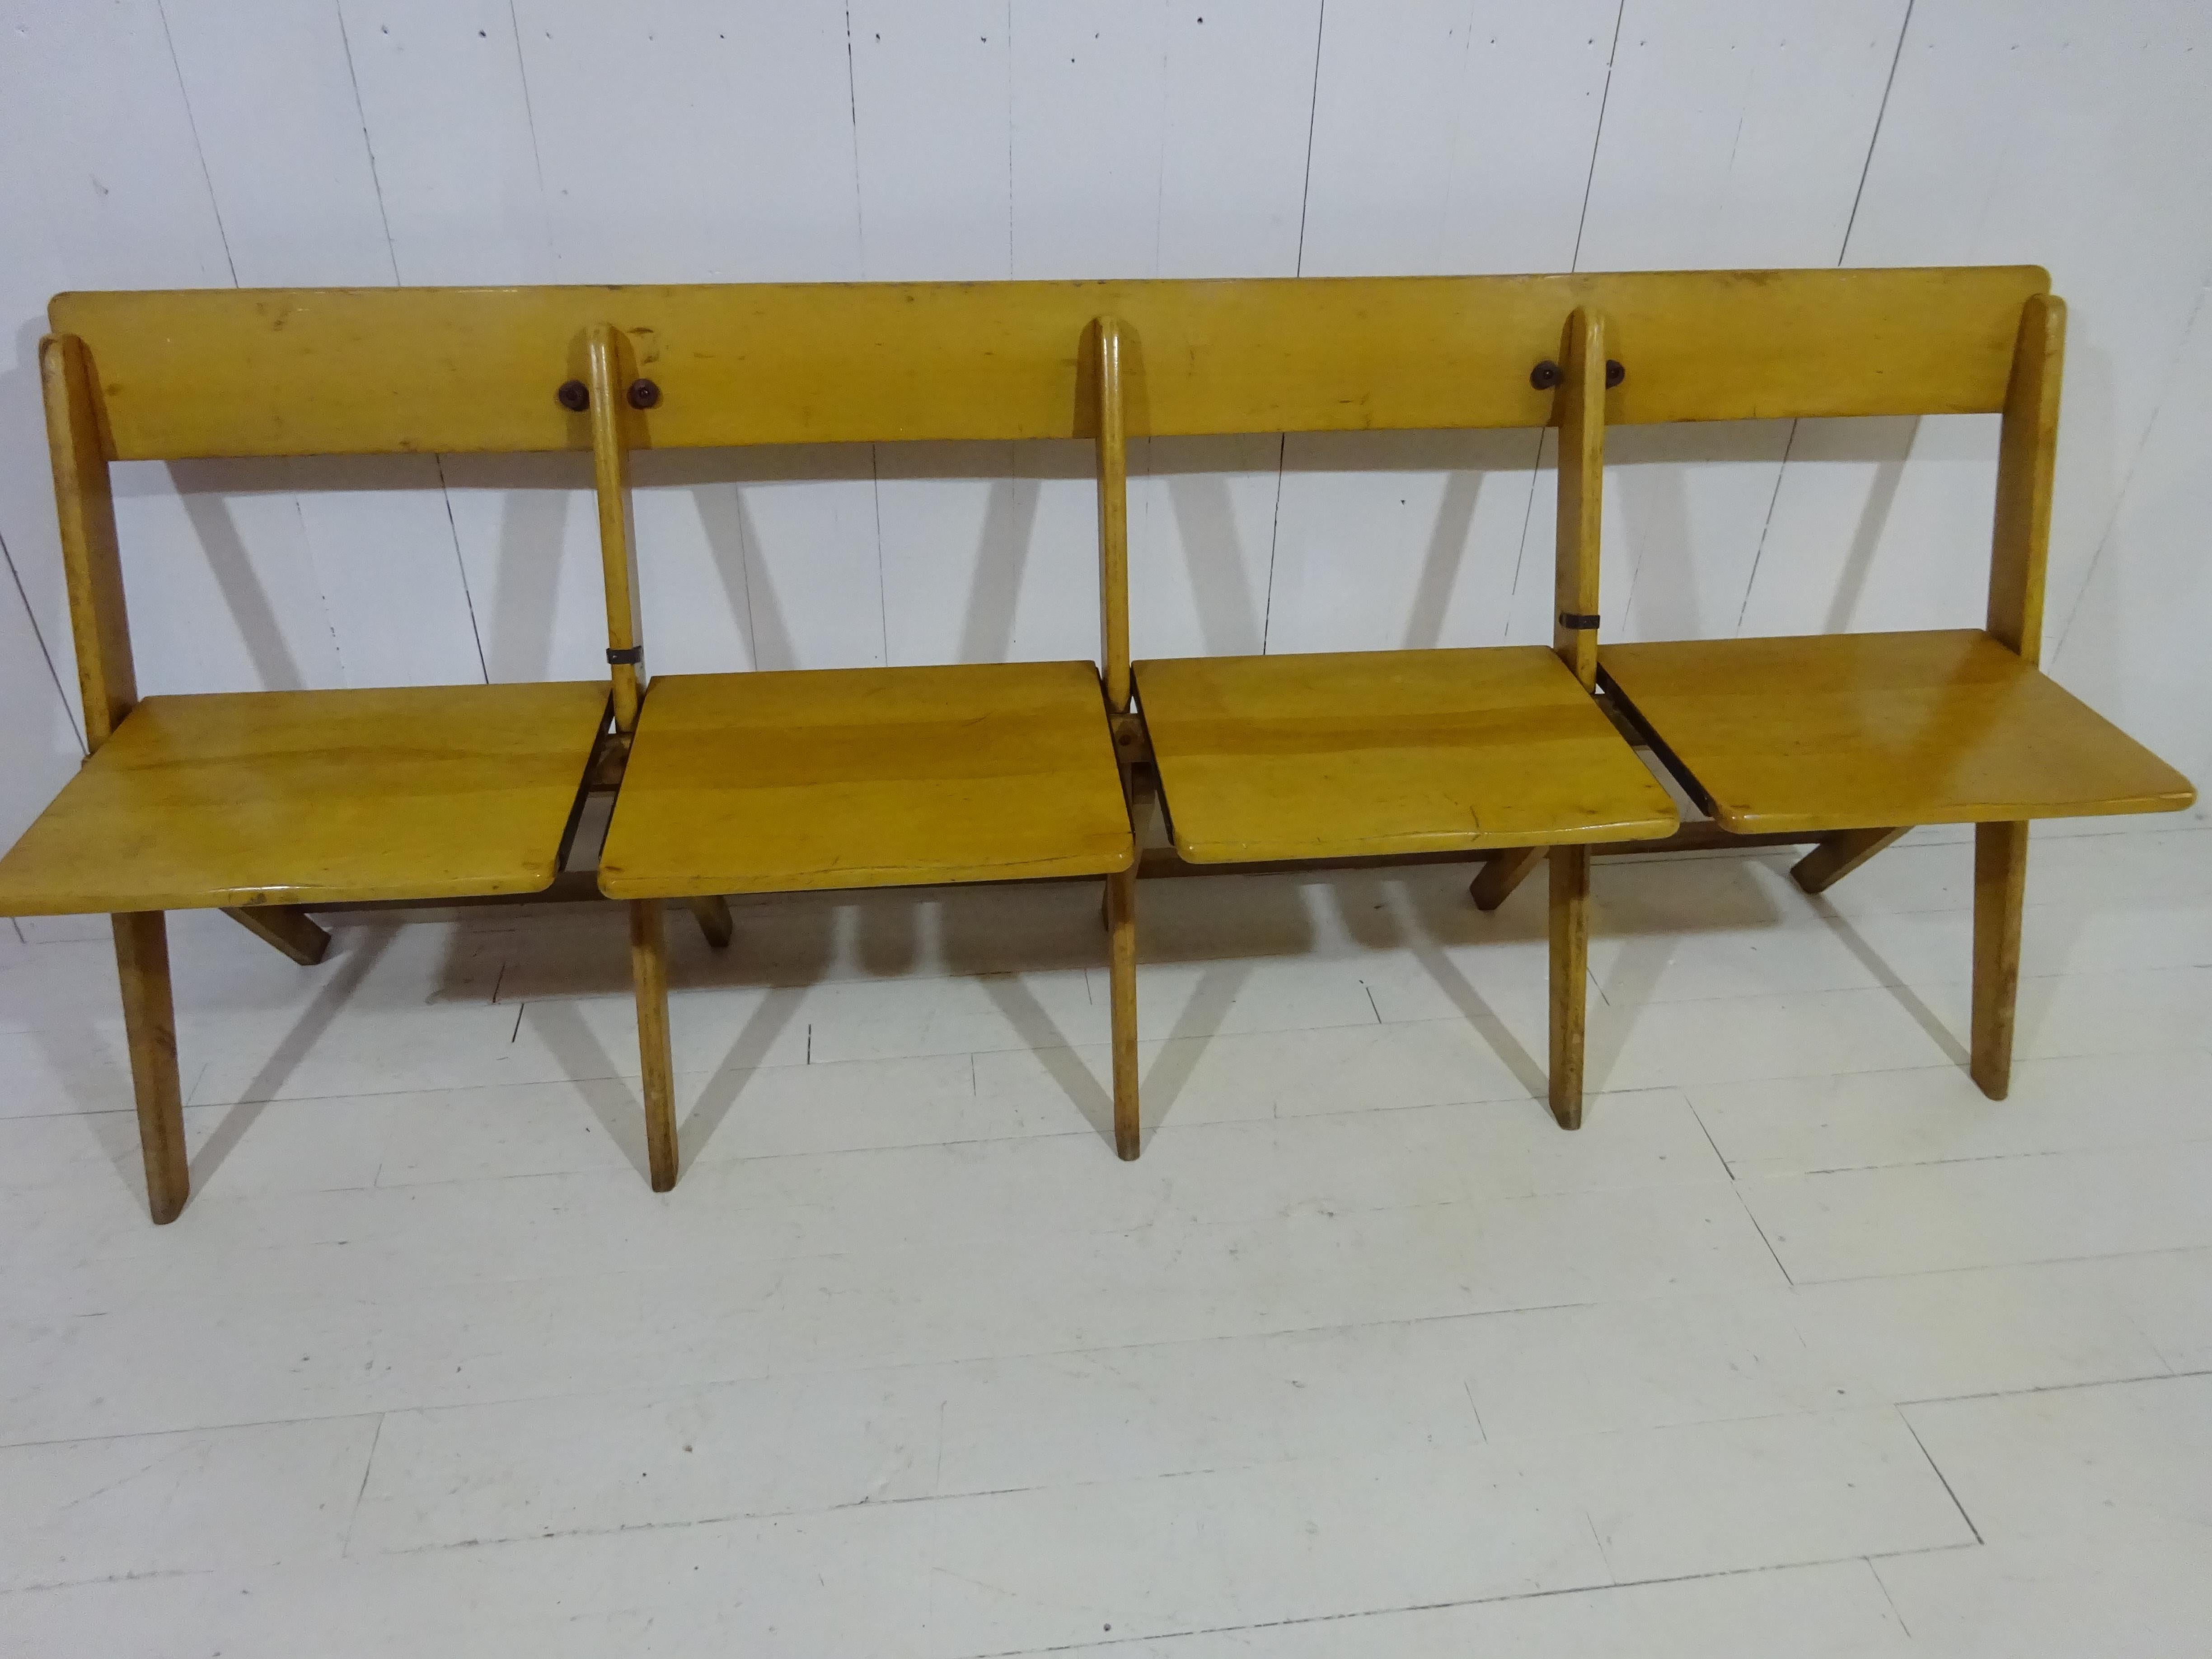 1950's Vintage Conjoined Folding Chapel Chairs In Good Condition For Sale In Tarleton, GB